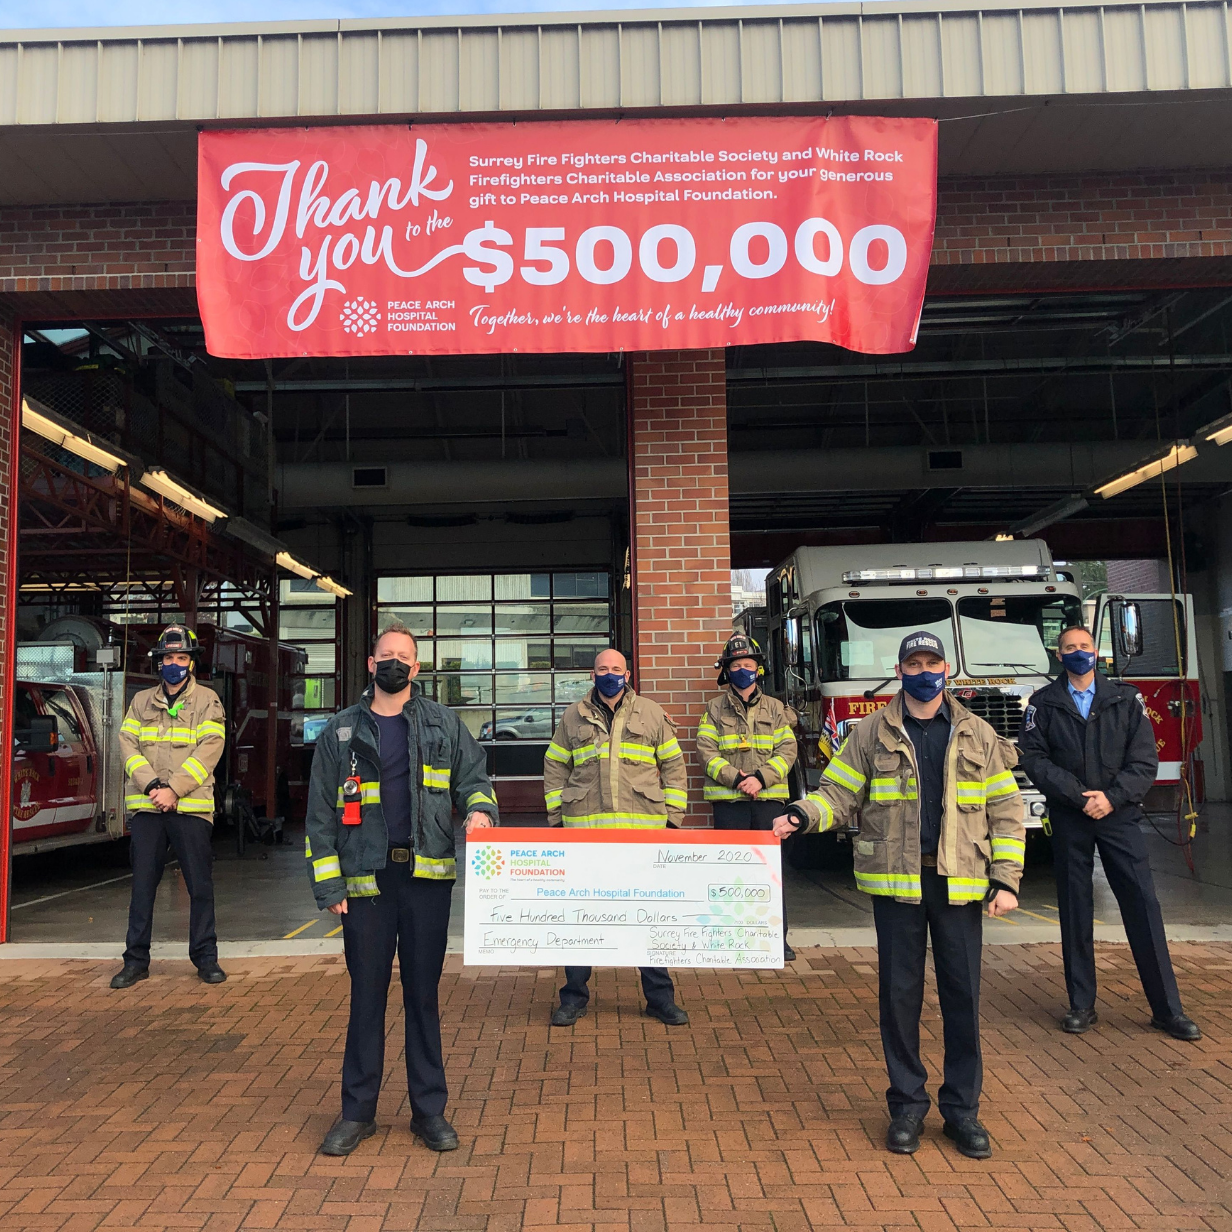 Firefighters Complete $500,000 pledge to Peace Arch Hospital’s new ER